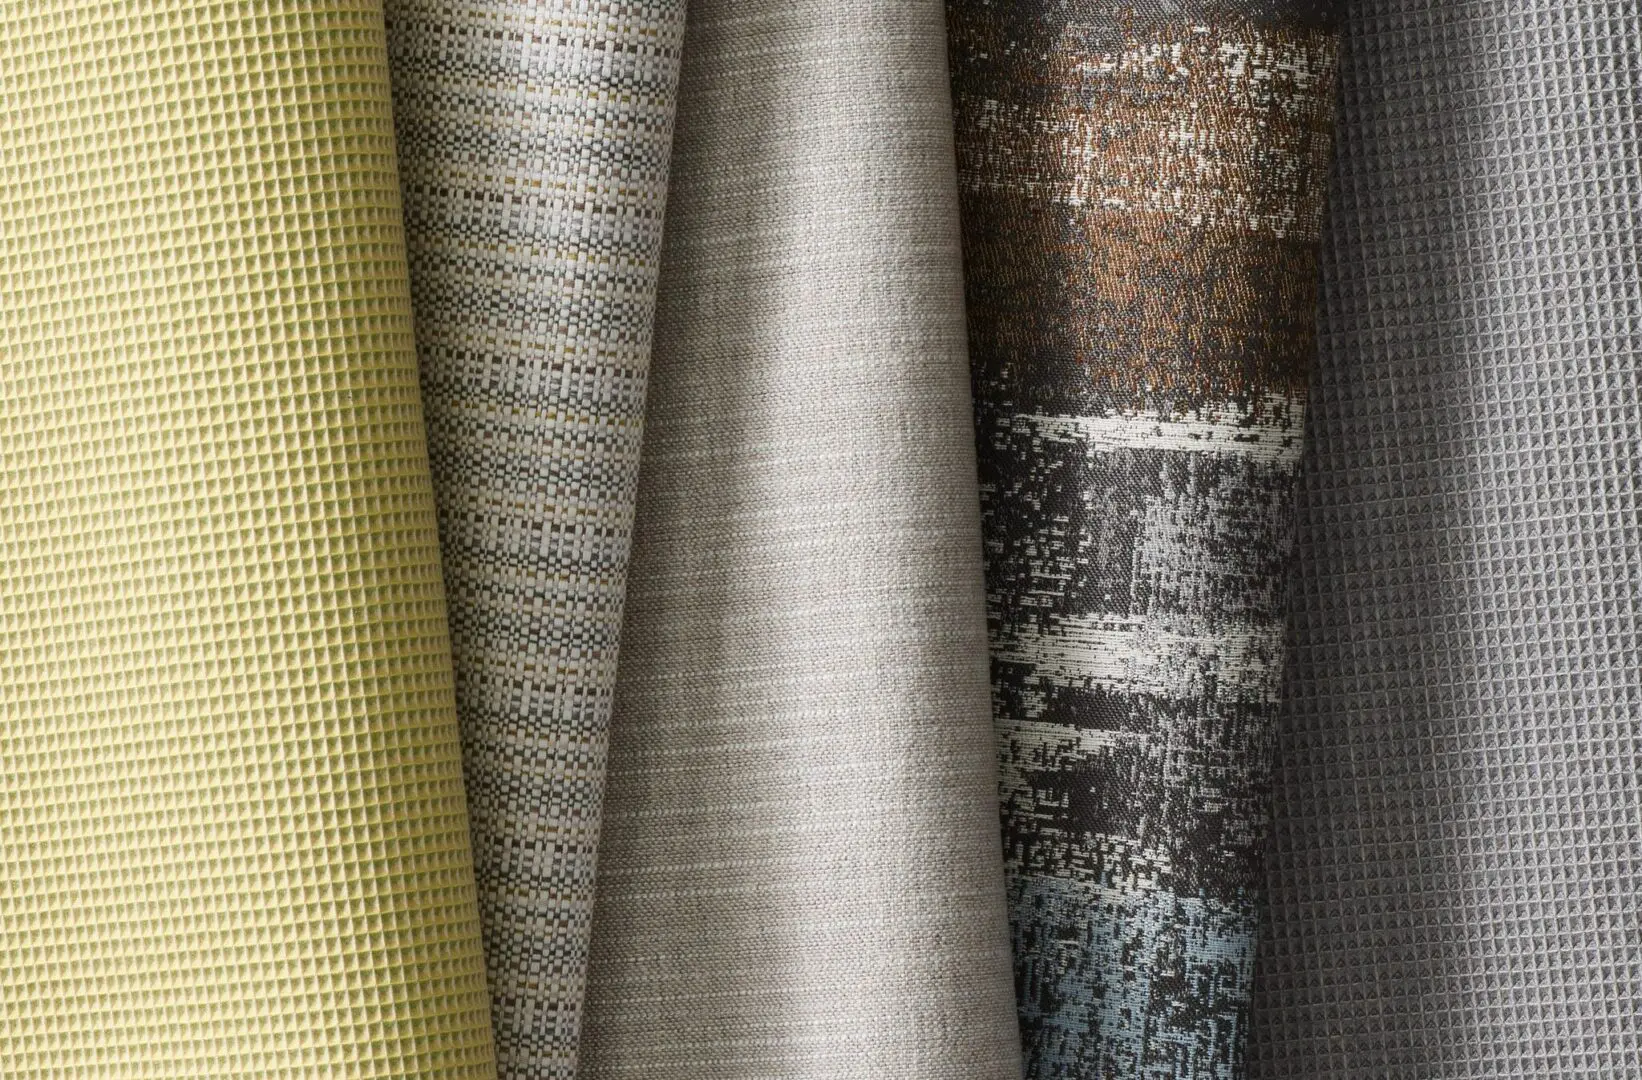 A close up of several different types of fabric